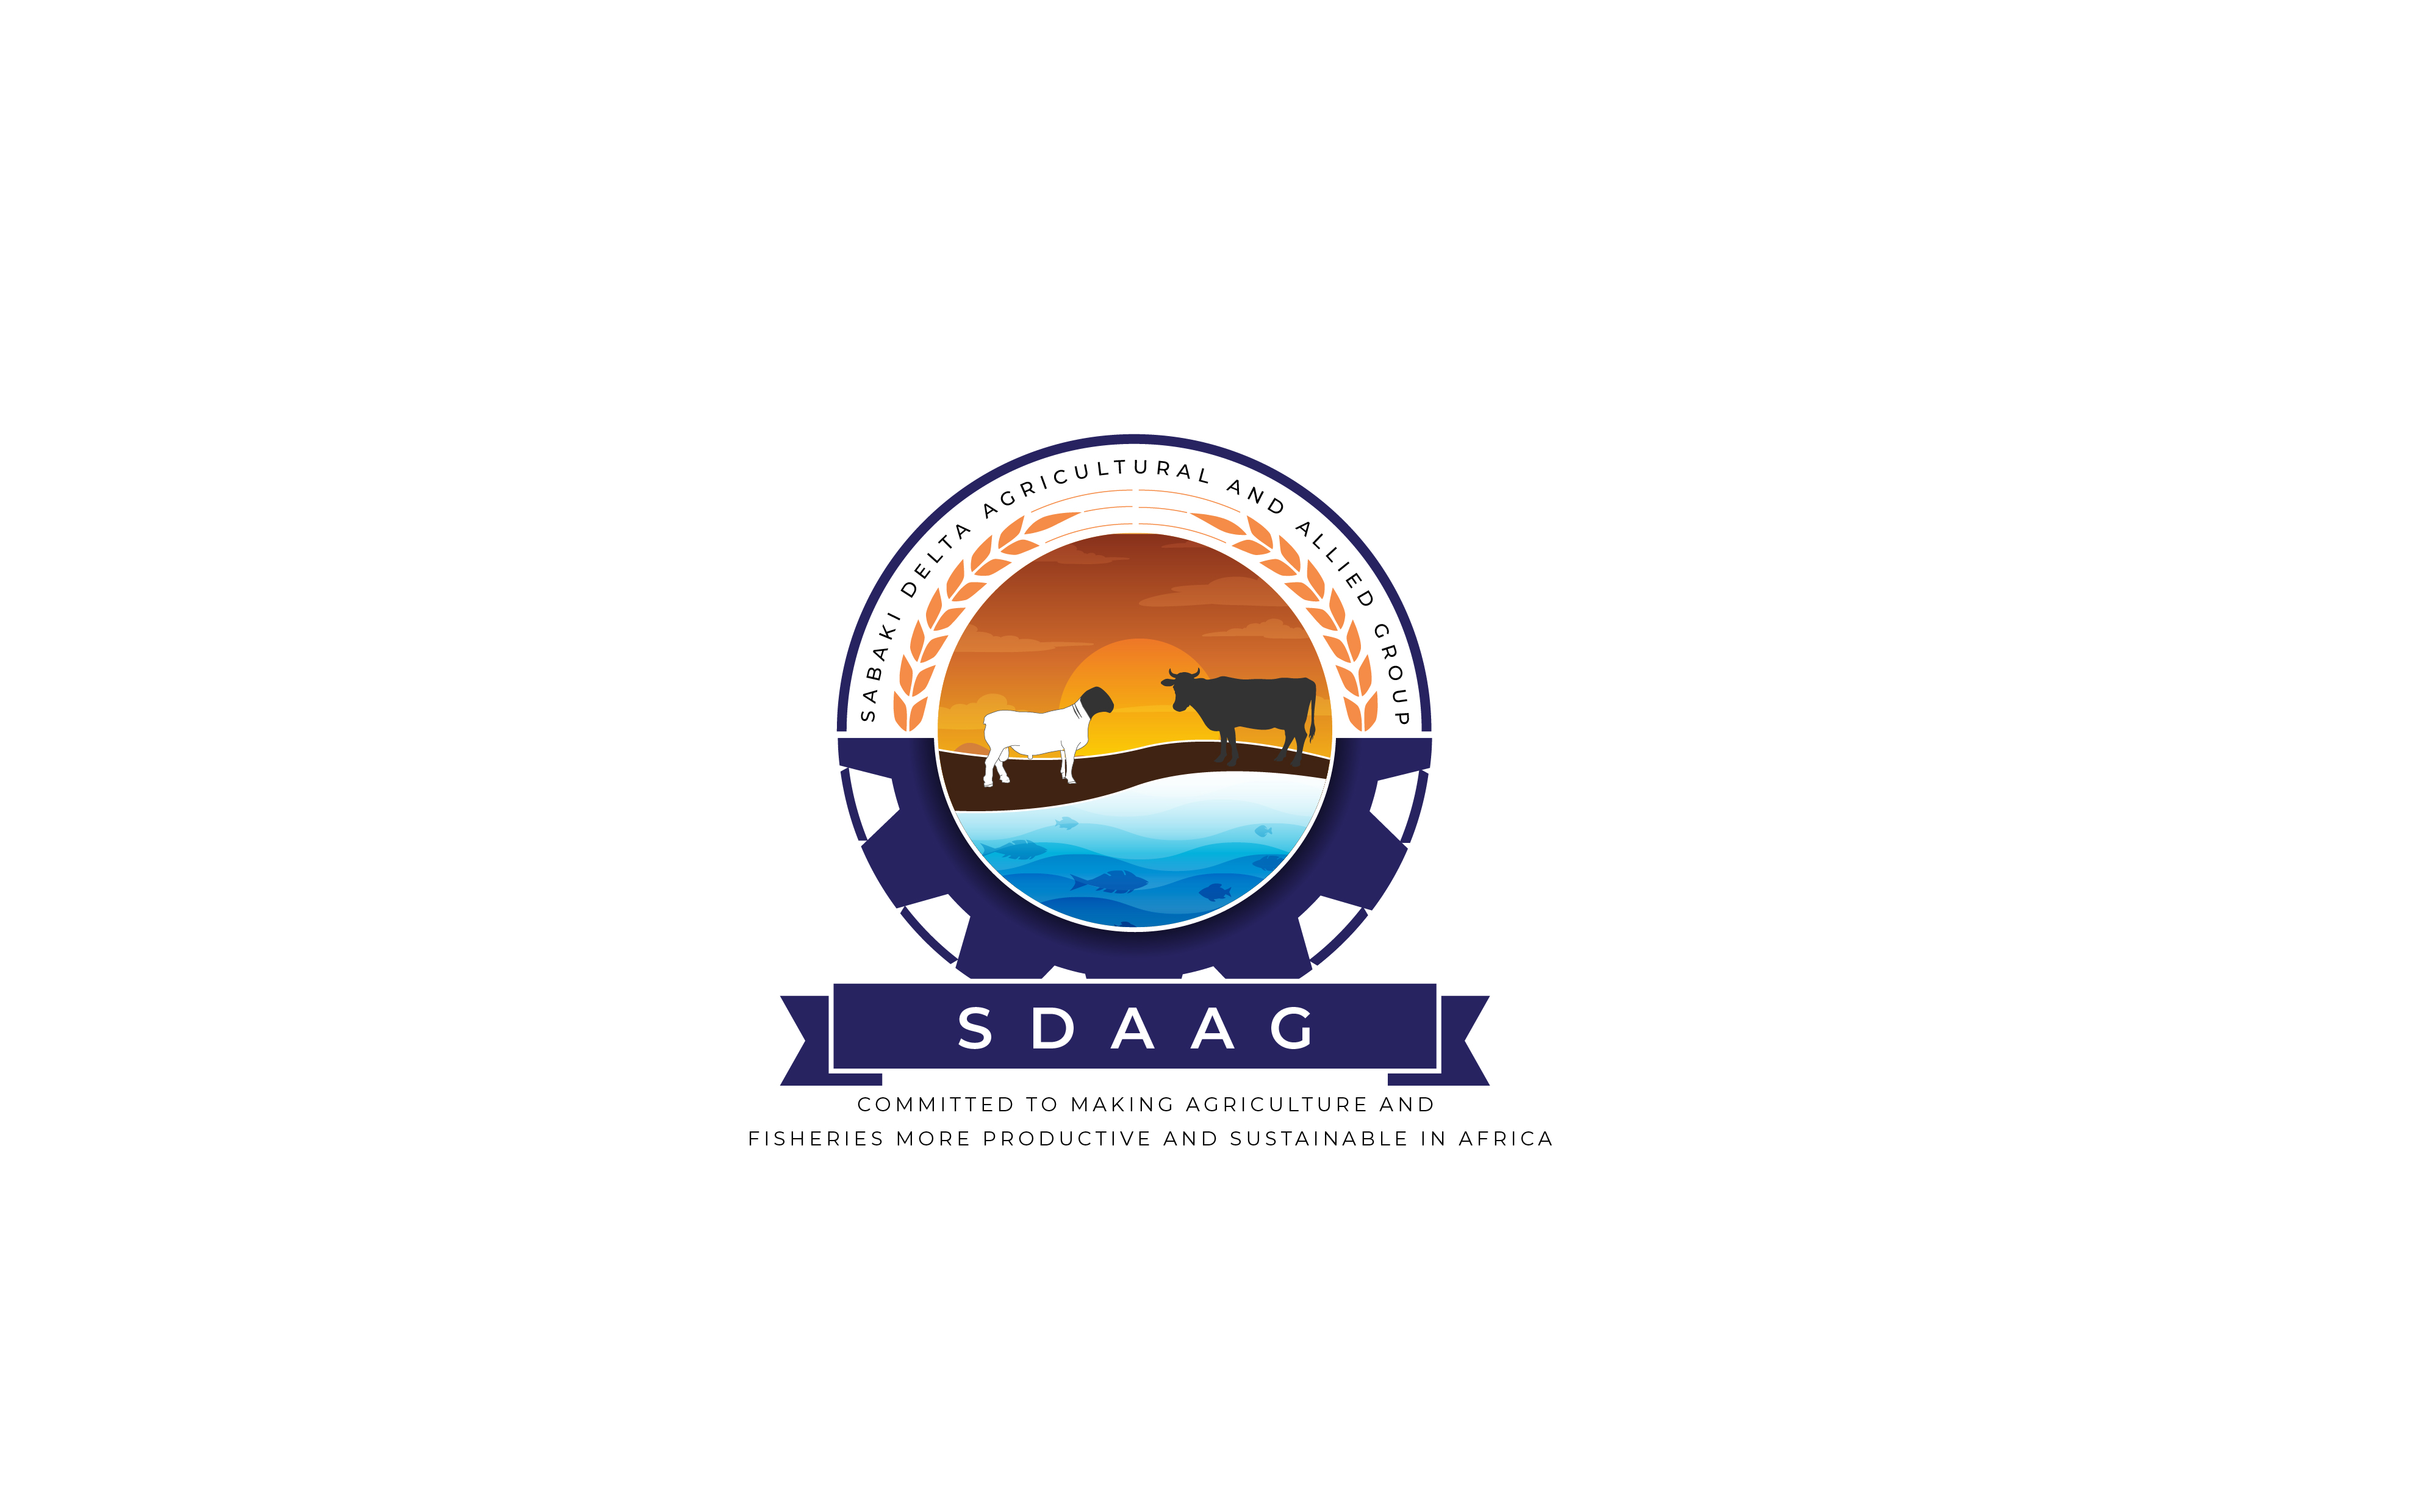 SDAAG Logo Design in Nairobi Kenya. The Best Logo Design Company in Nairobi, Kenya, Kampala, Uganda, Dar es Salaam, Kigali, Rwanda, Juba, South Sudan, and Mogadishu, Somalia is Galactik IT. Galactik IT provides corporate, governmental, non-profit, and small- and medium-sized business clients with expert logo graphics design services. With an expert working on your brand visuals at each stage, Galactik IT offers a logo design thorough process in Nairobi, Kenya that smoothly takes you from planning to post-launch. Galactik IT never skimped on quality. Galactik IT builds beautifully made, effective logo by by hand. Logo, company profile, business card, letterhead, brochure, social media posters, flyers designers in nairobi kenya